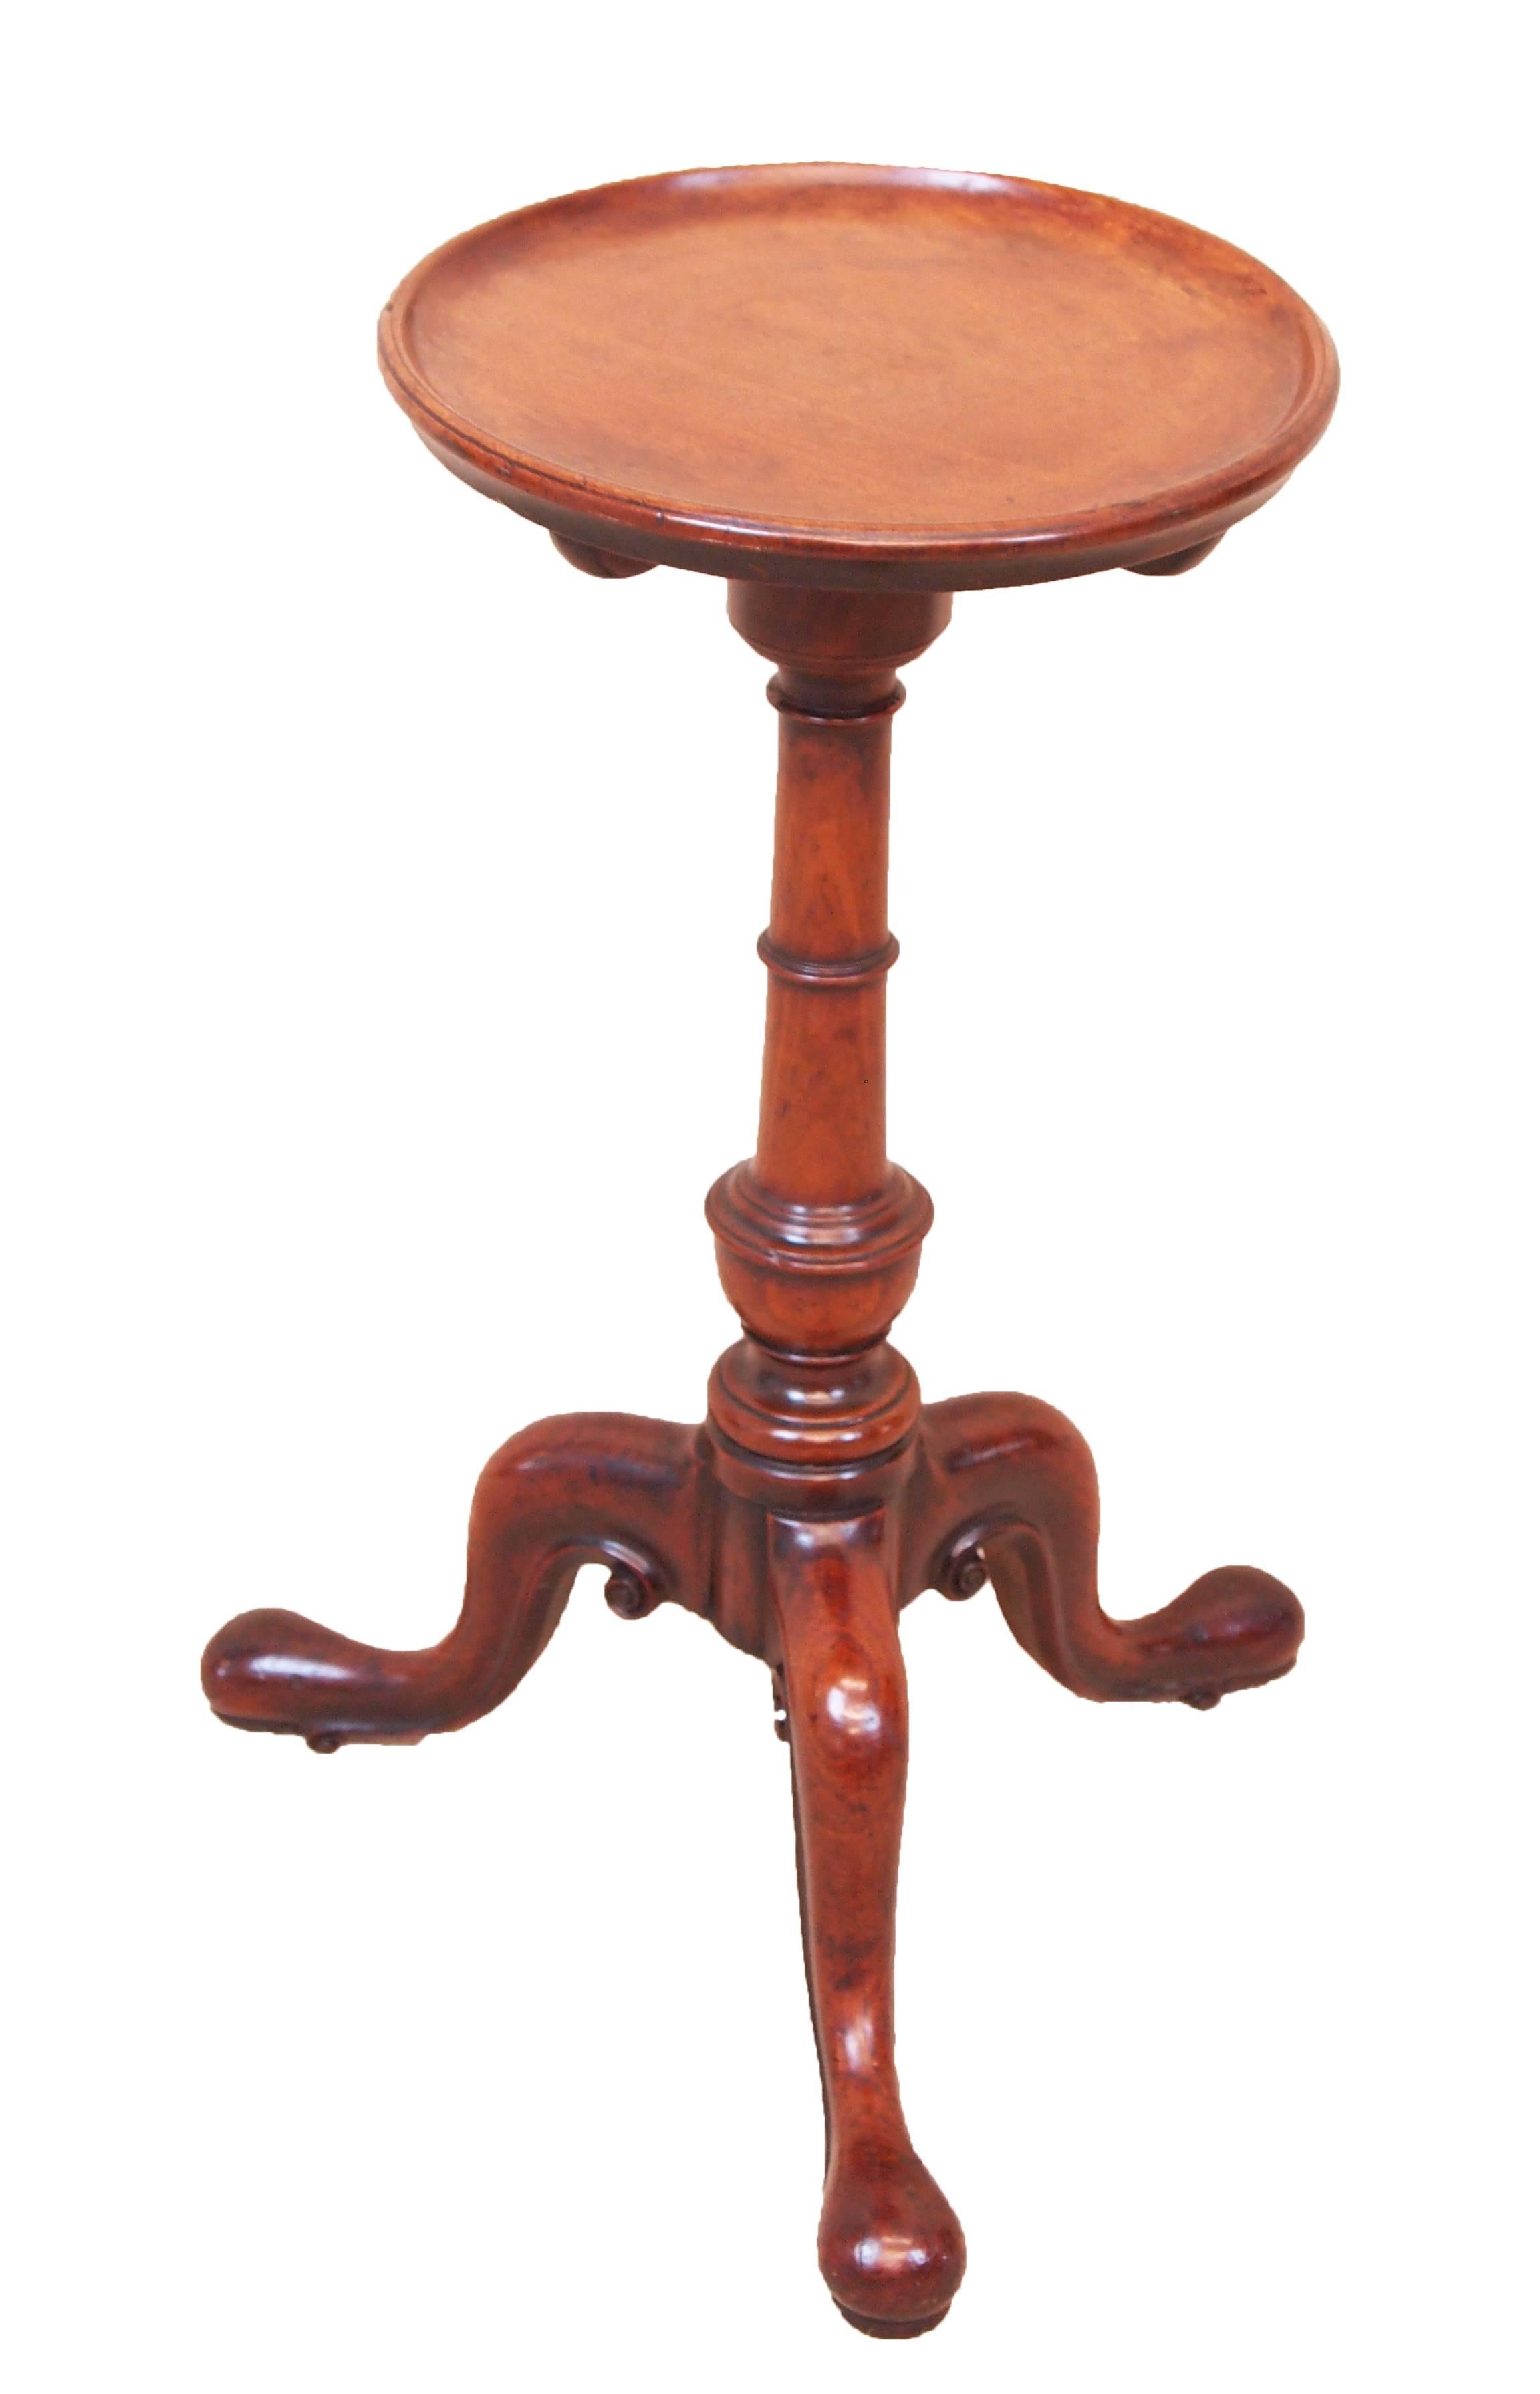 A charming 18th century Georgian mahogany kettle stand
Well figured circular dish top raised on elegant turned
Stem and carved scrolling tripod legs.